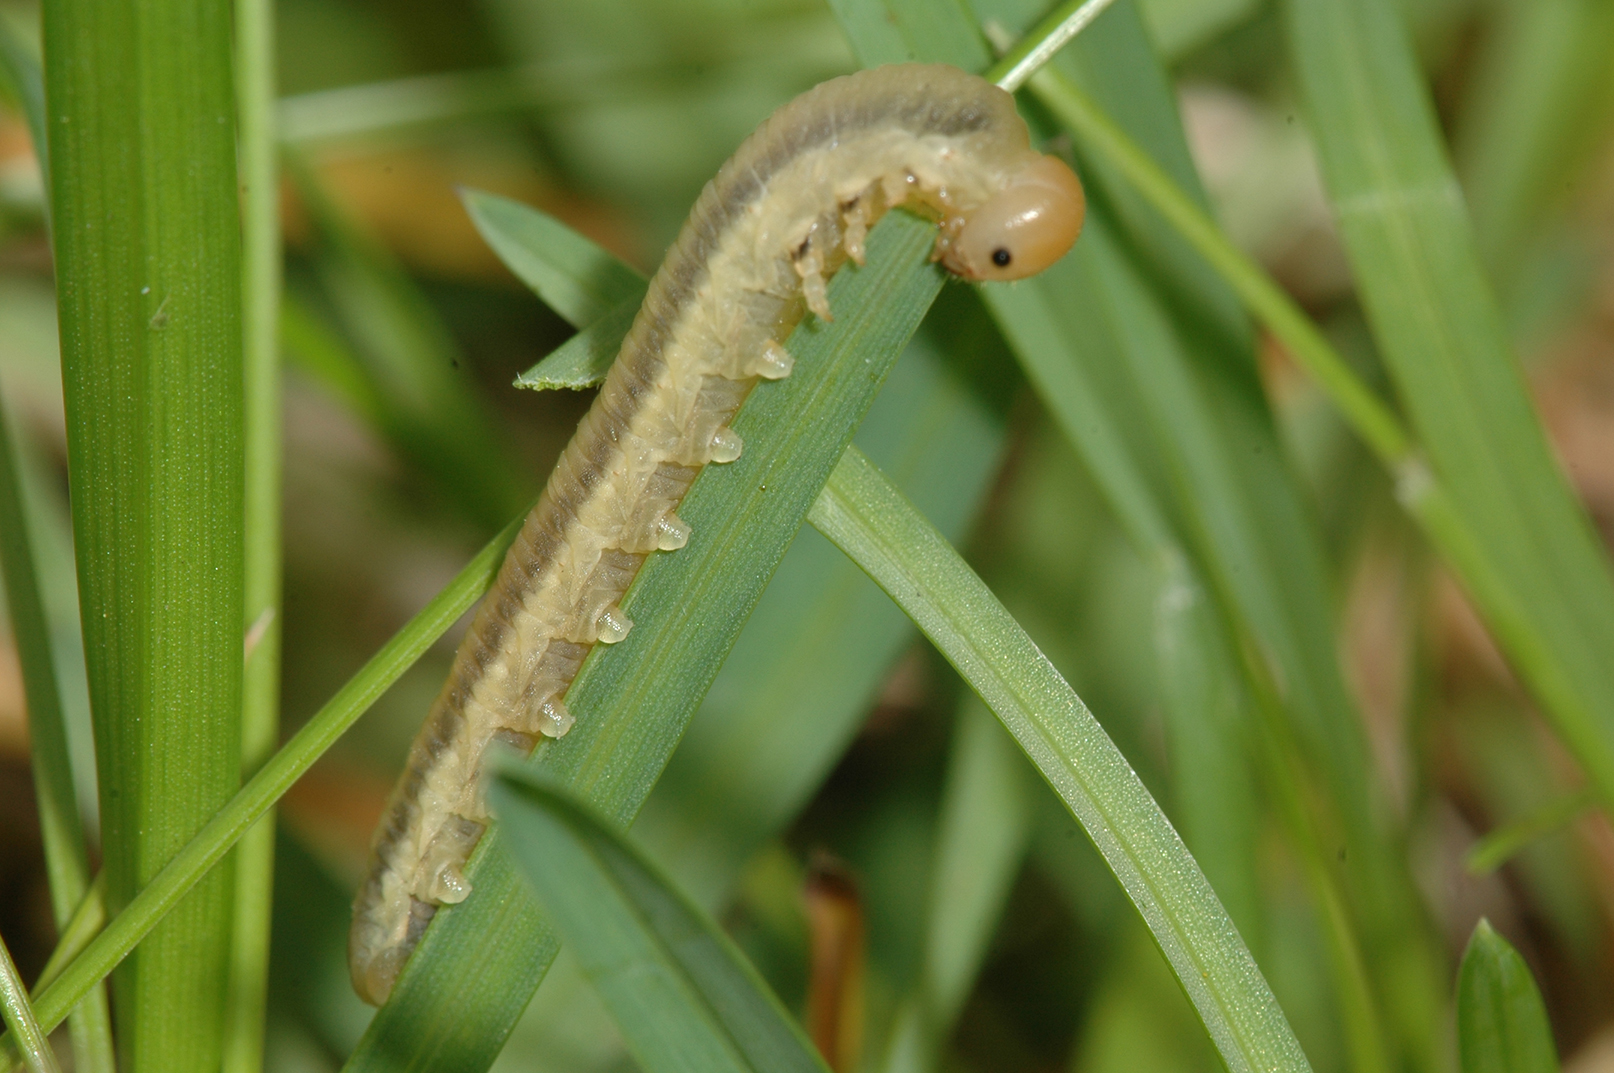 Long light colored centipede with round head on a blade of grass